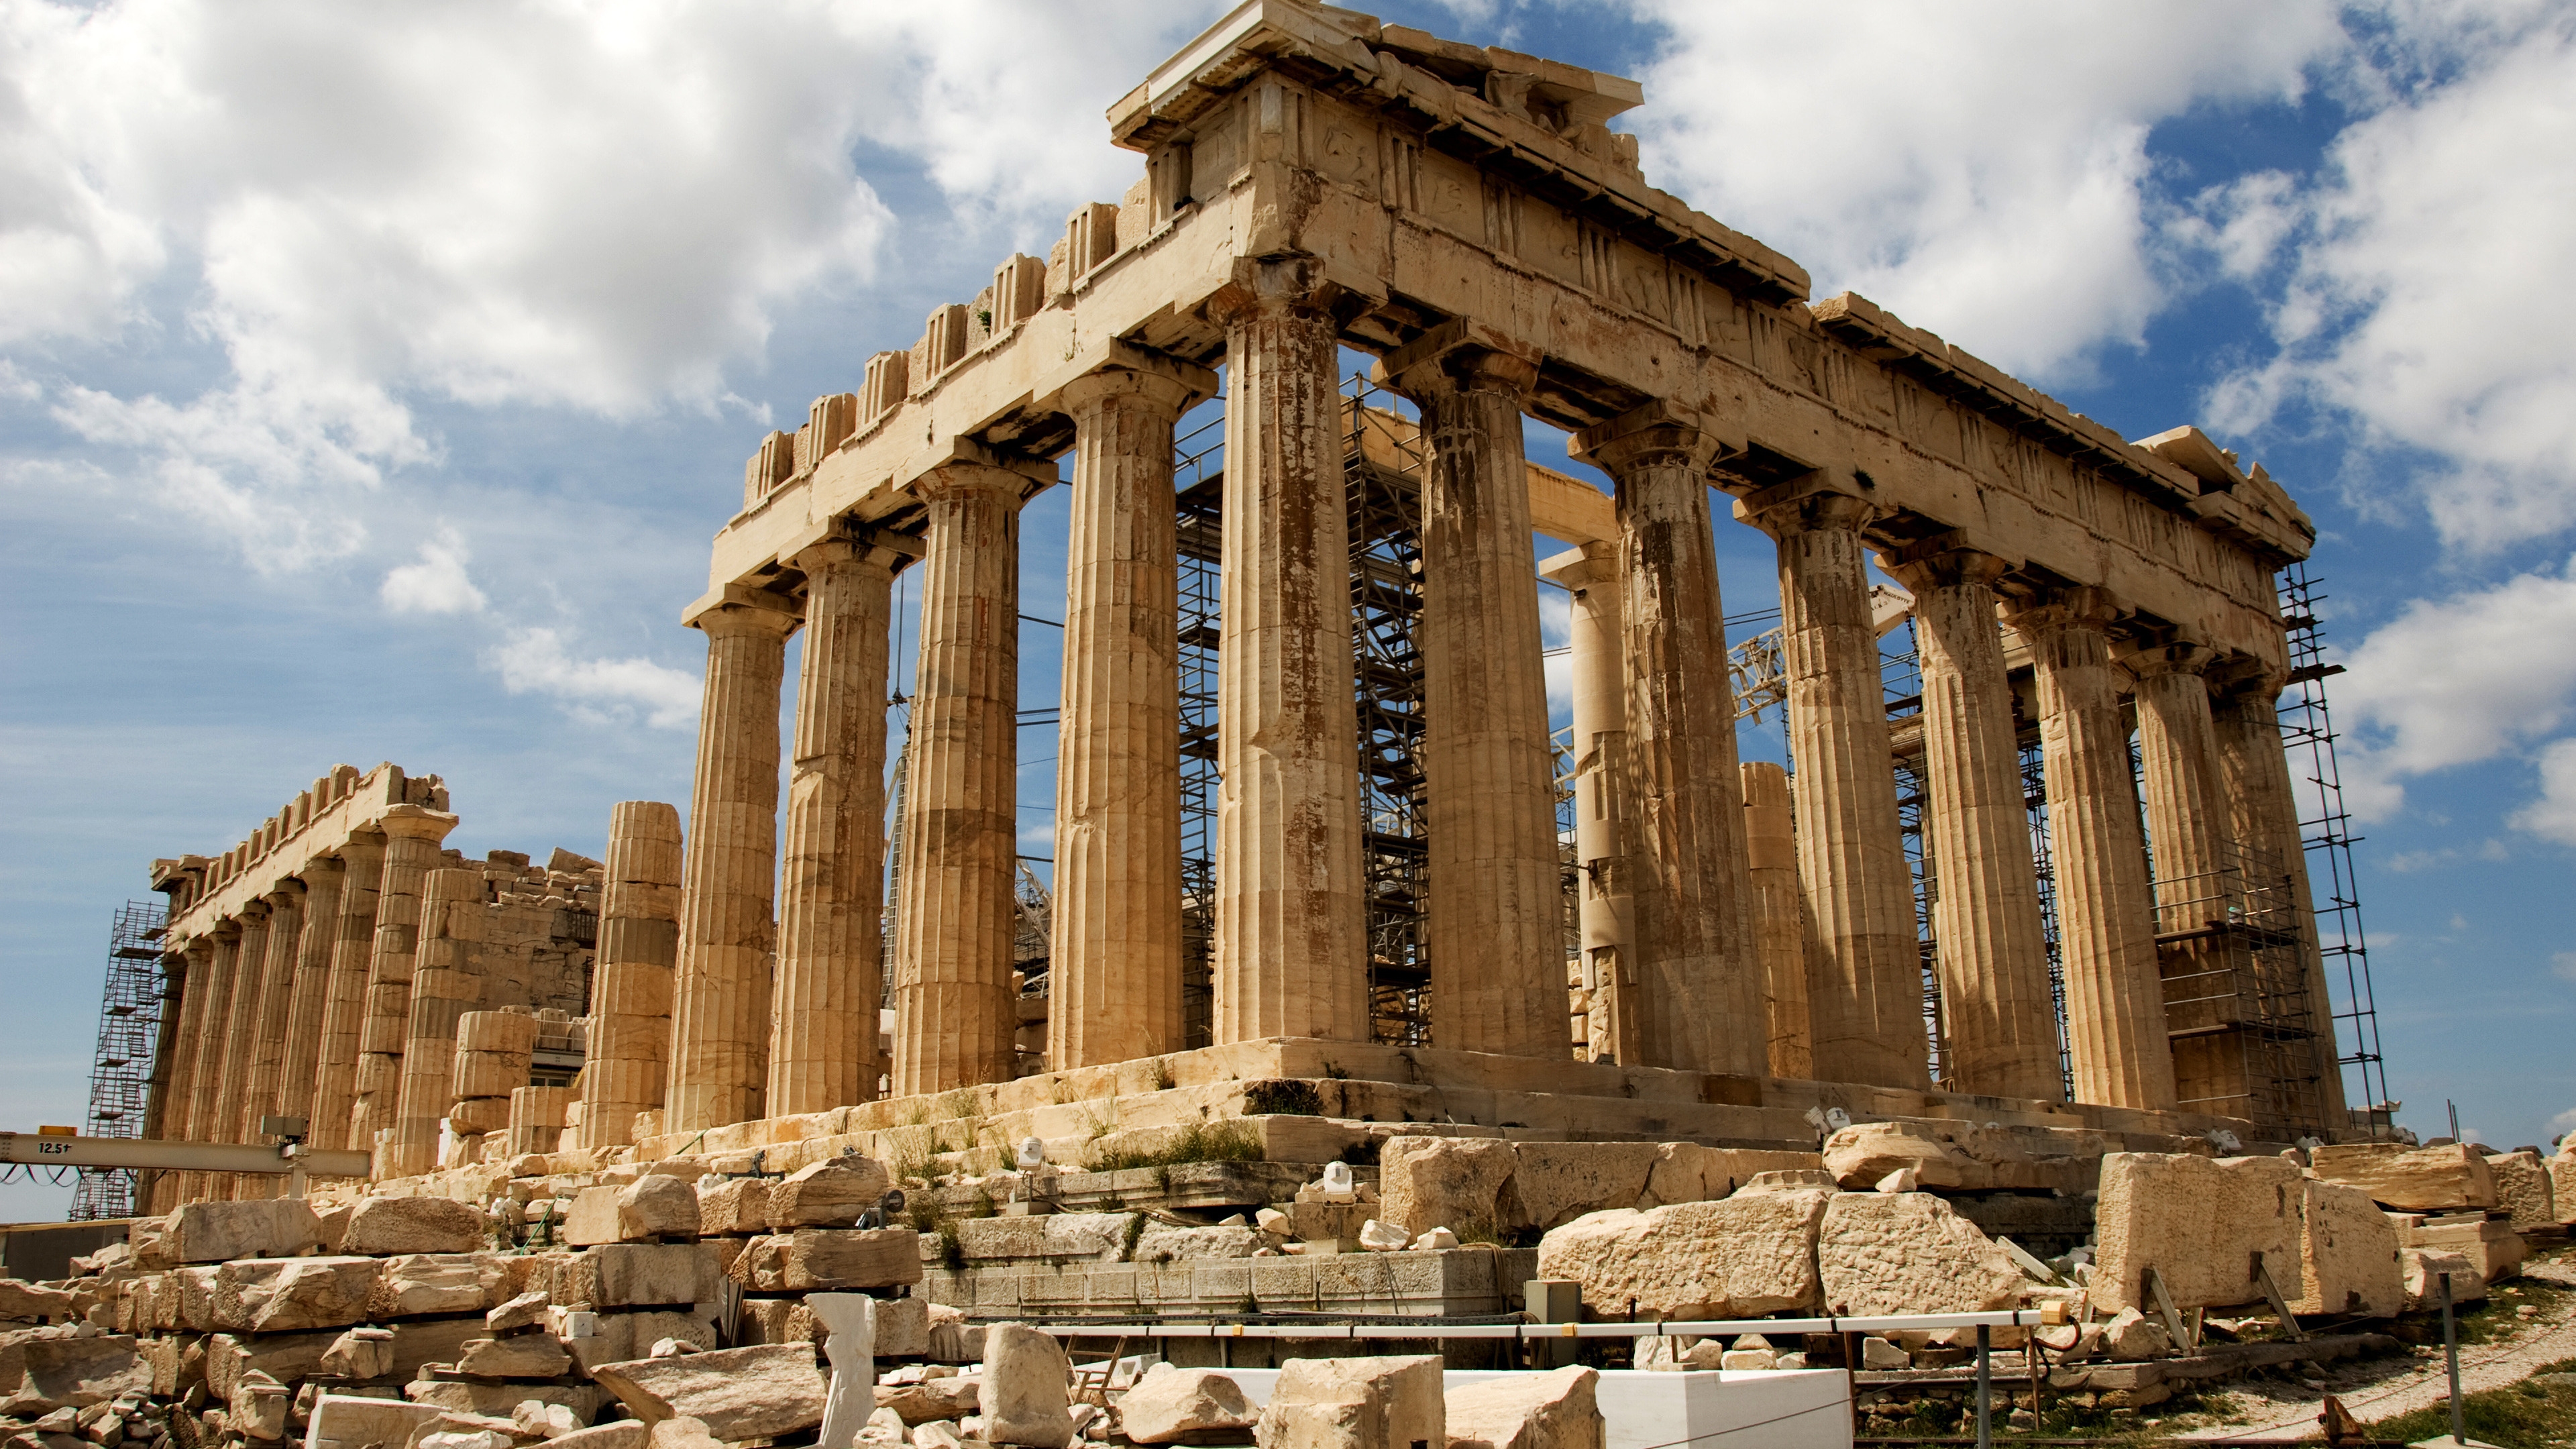 Parthenon Greece for 3840 x 2160 Ultra HD resolution